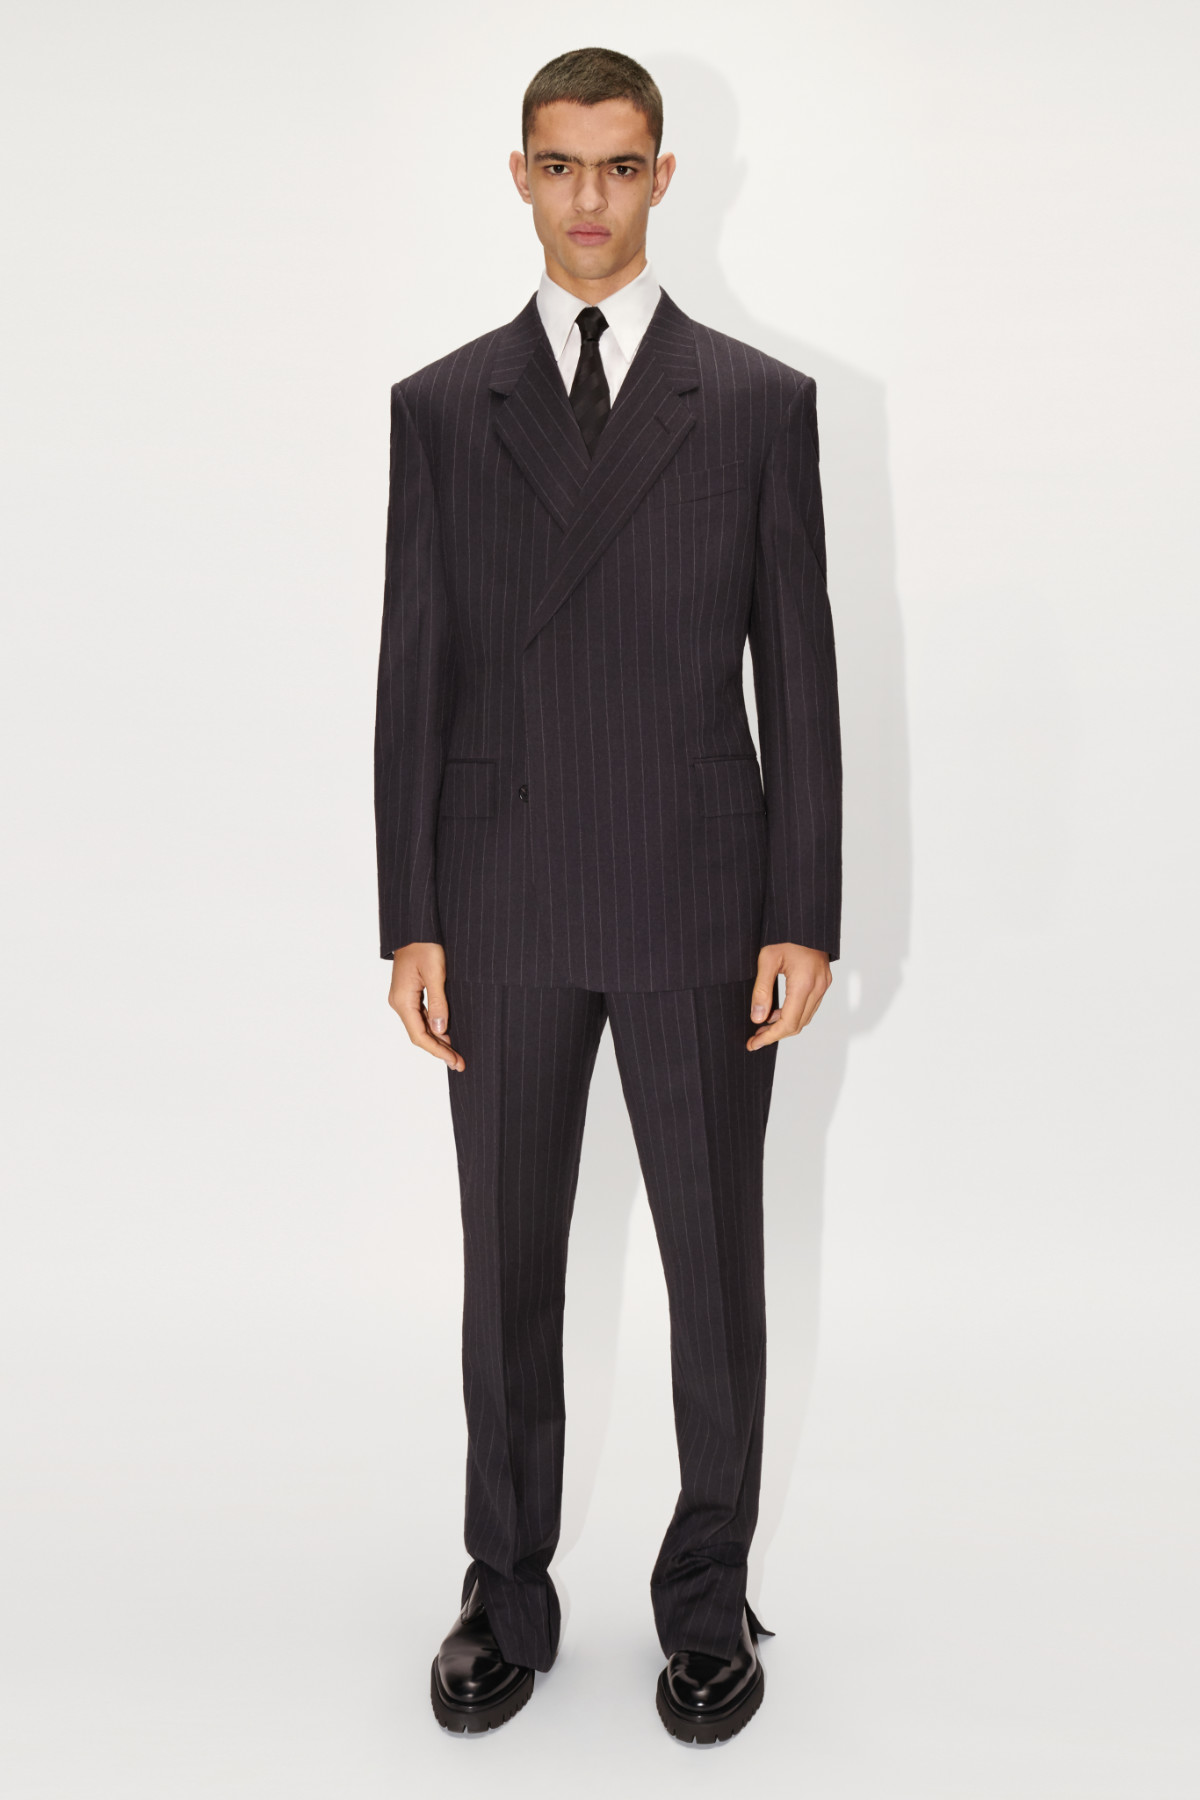 dunhill Presents Its New Fall Winter 2022 Collection: Uniform